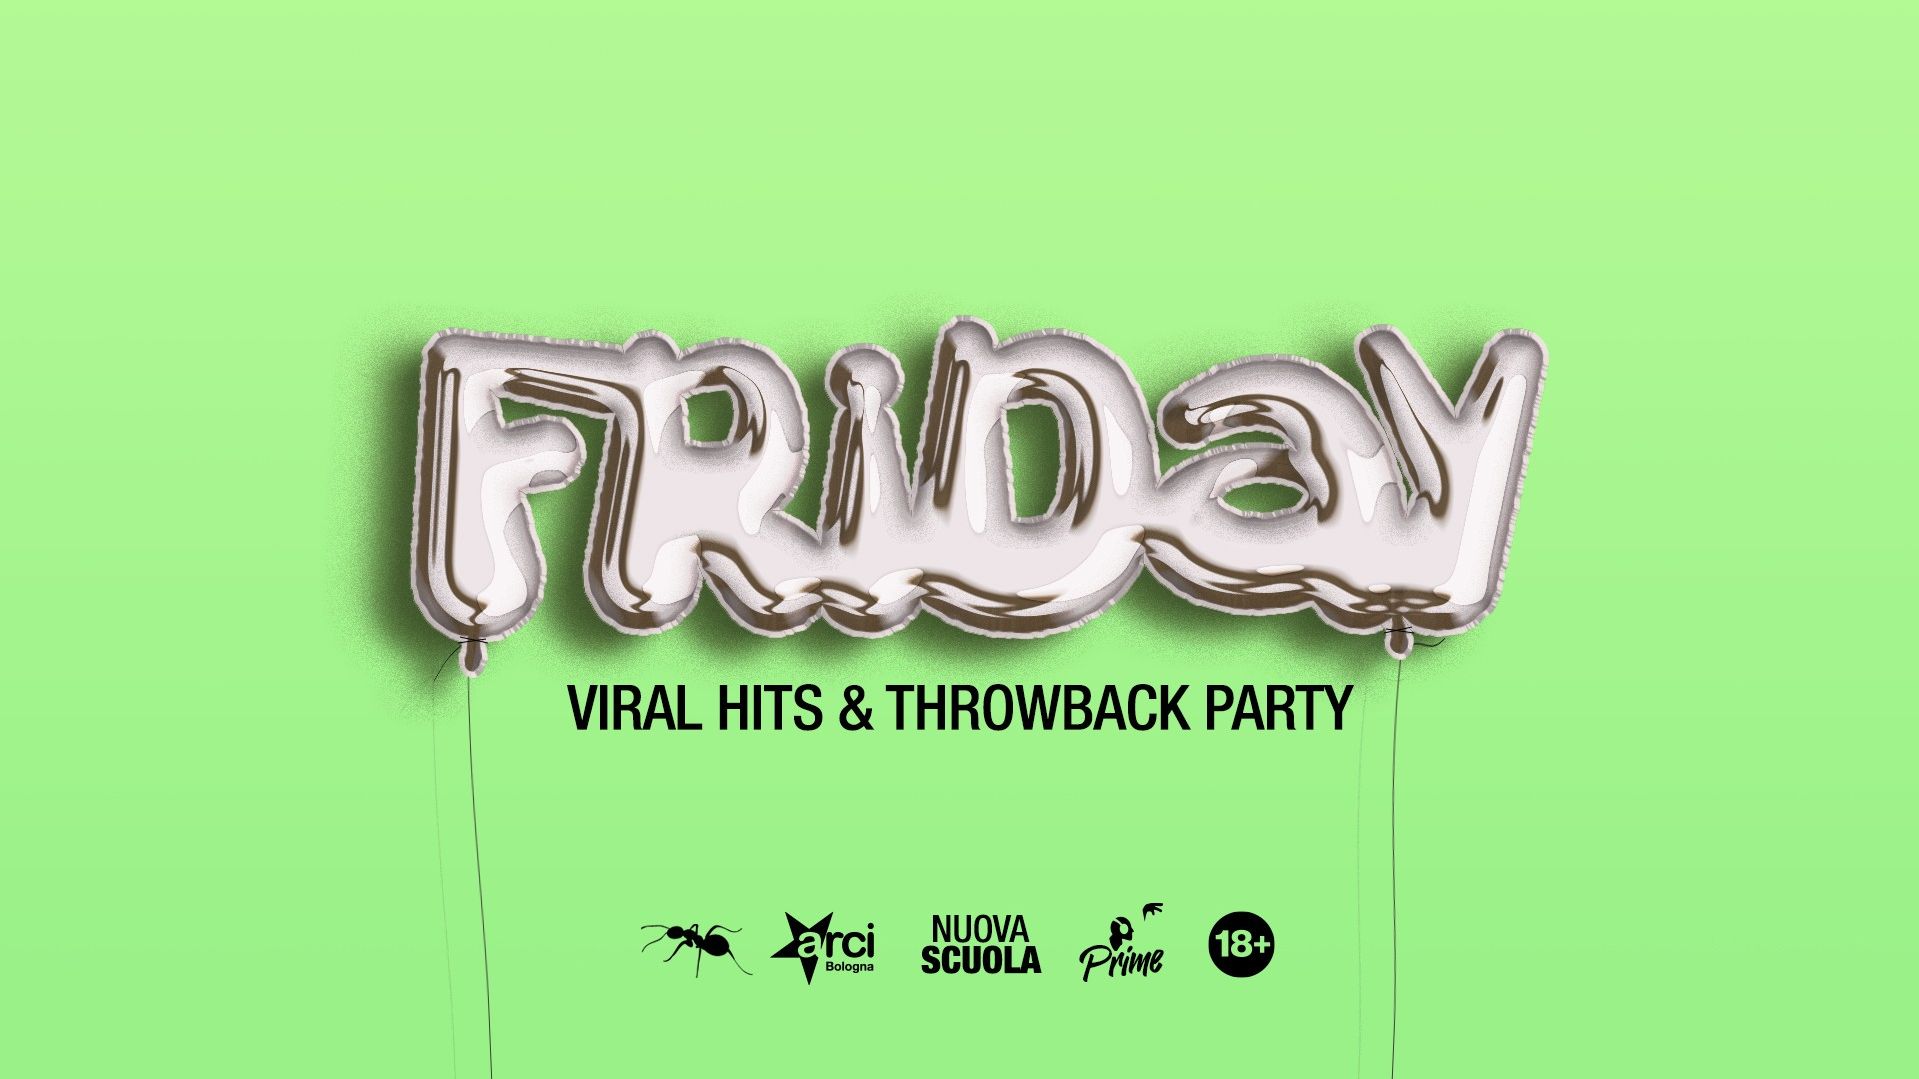 It’s Friday! Viral Hits & Throwback Party